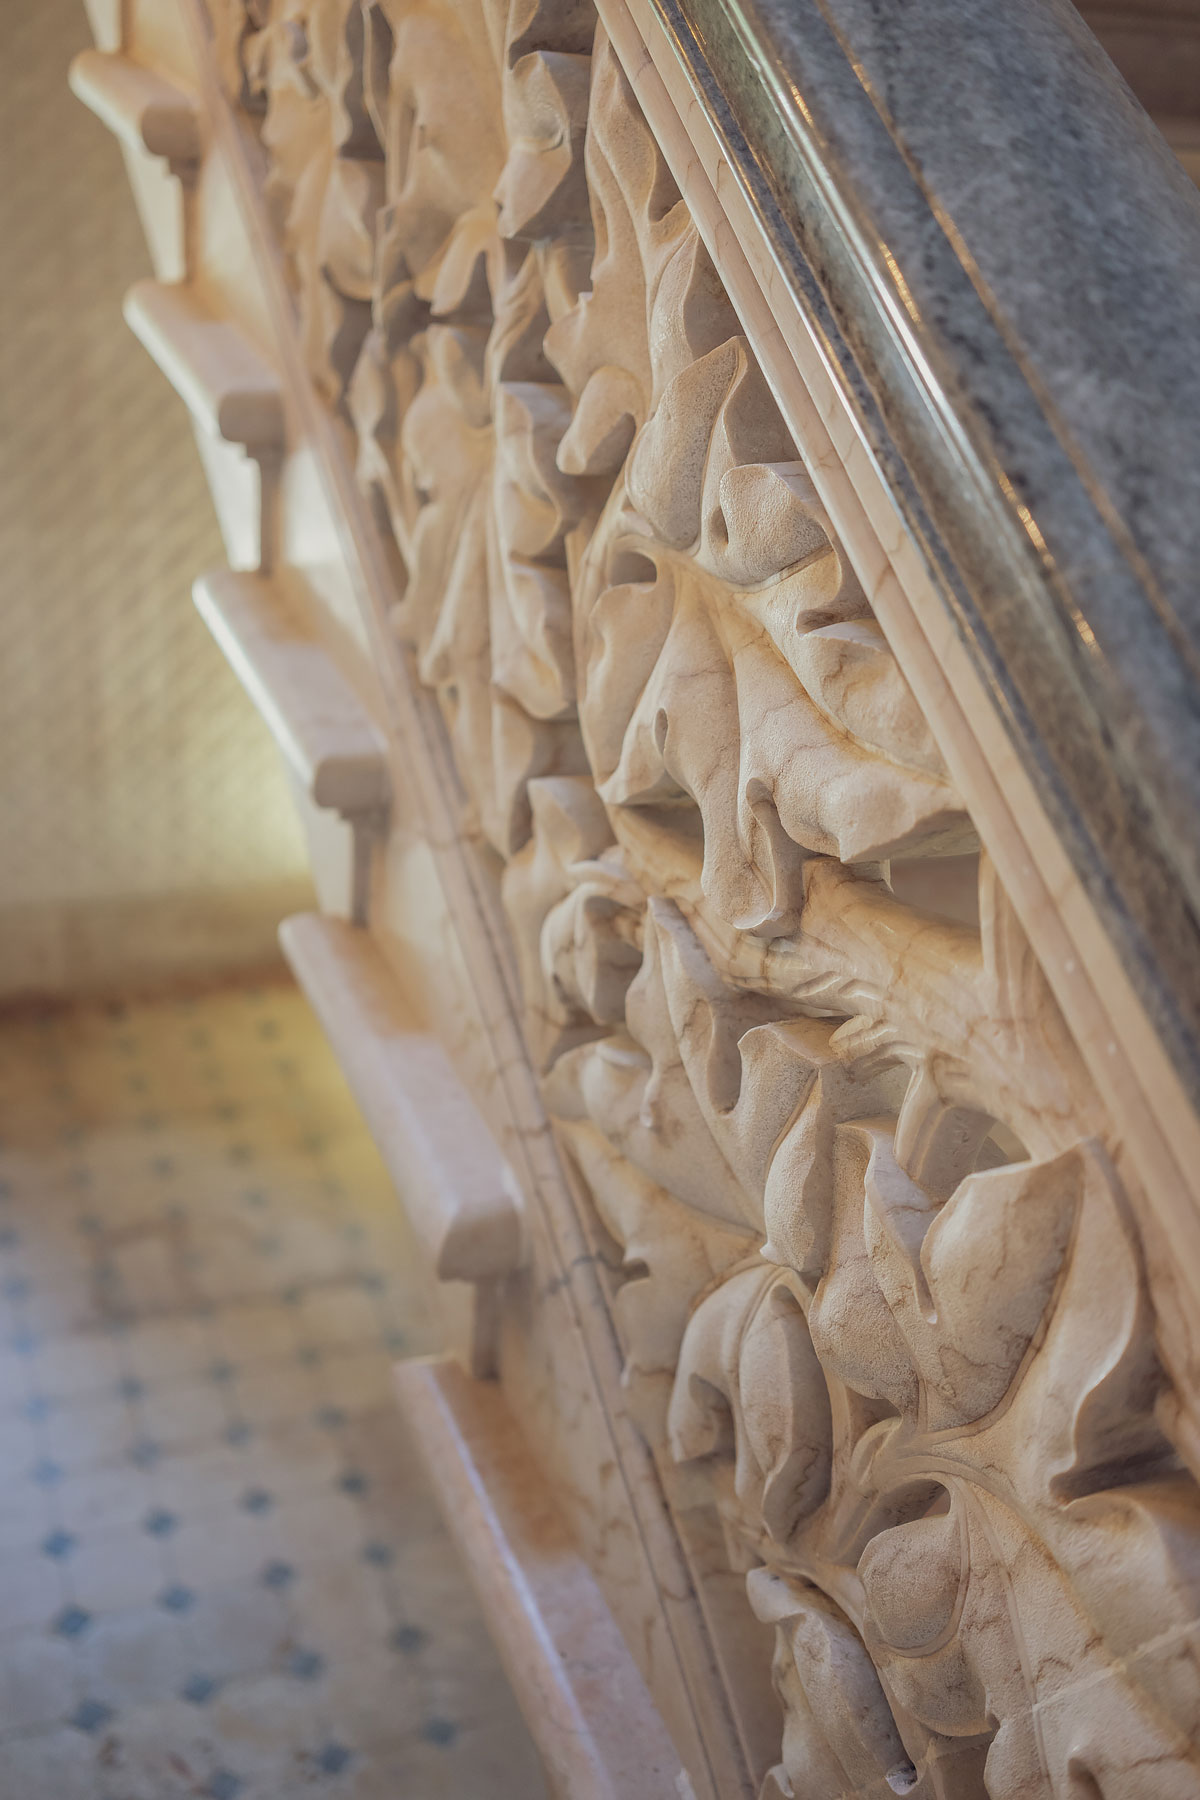 Slow travel to Lisbon | Monserrate Palace stair details© Soonafternoon